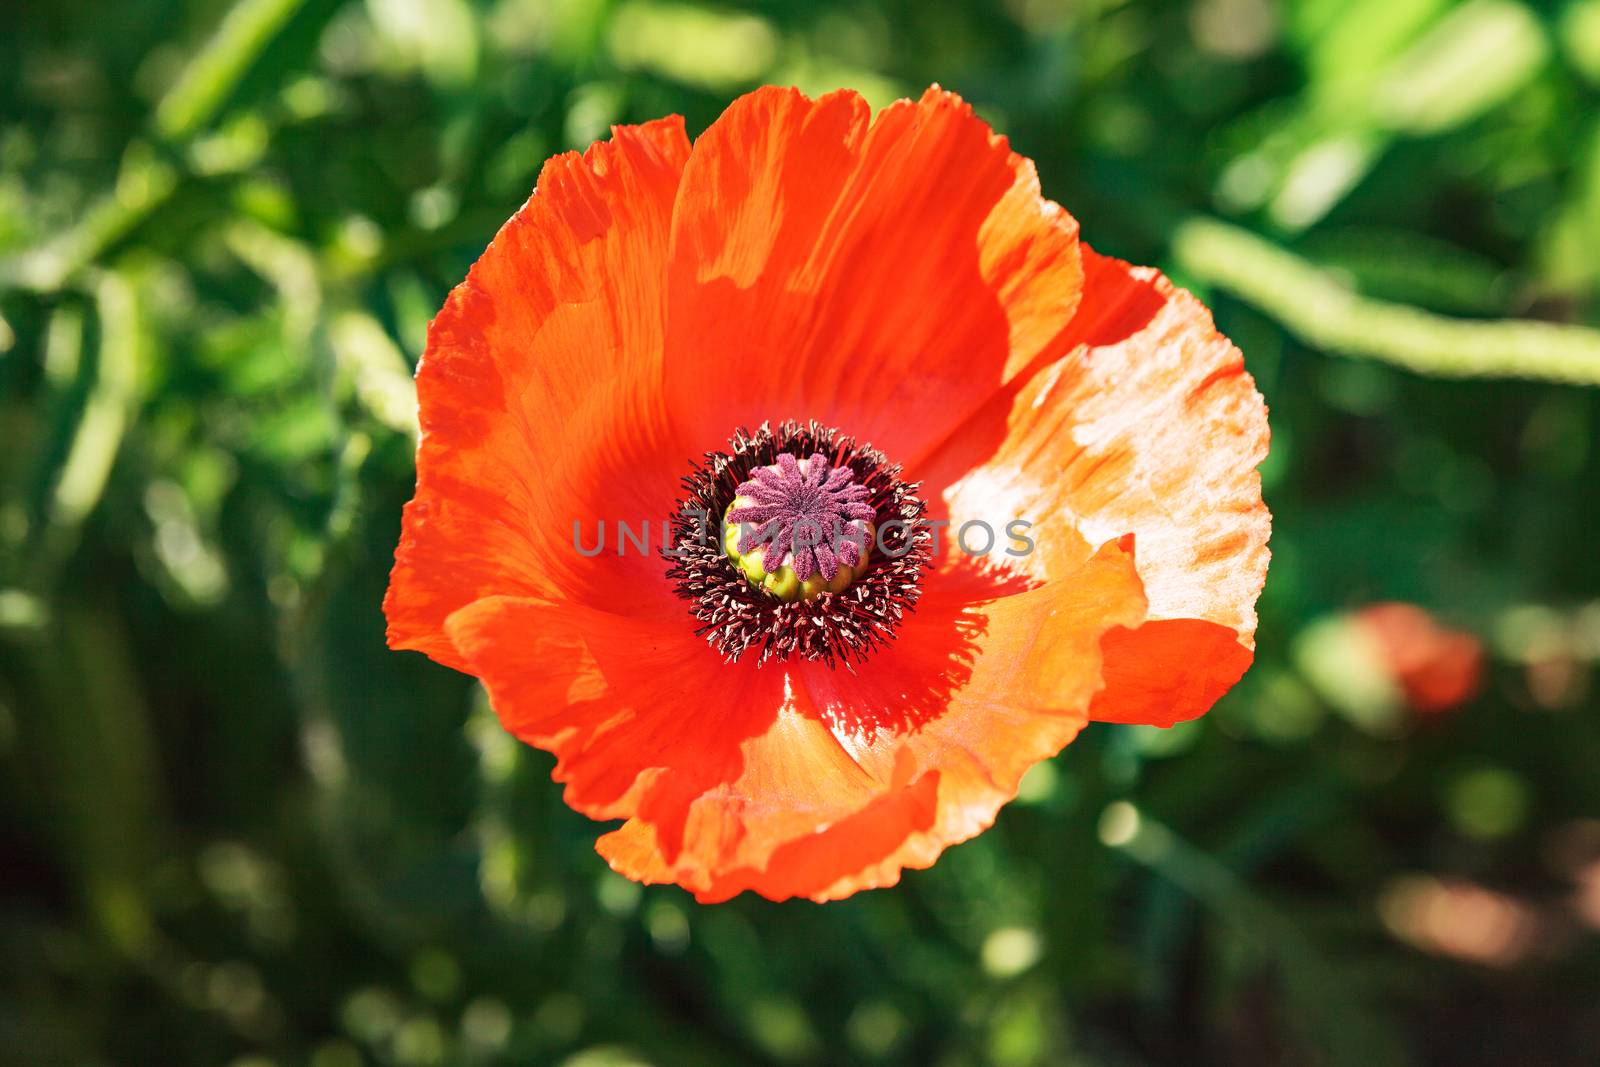 Single colorful red poppy in a corn field, meadow or garden viewed from above in sunlight against green foliage